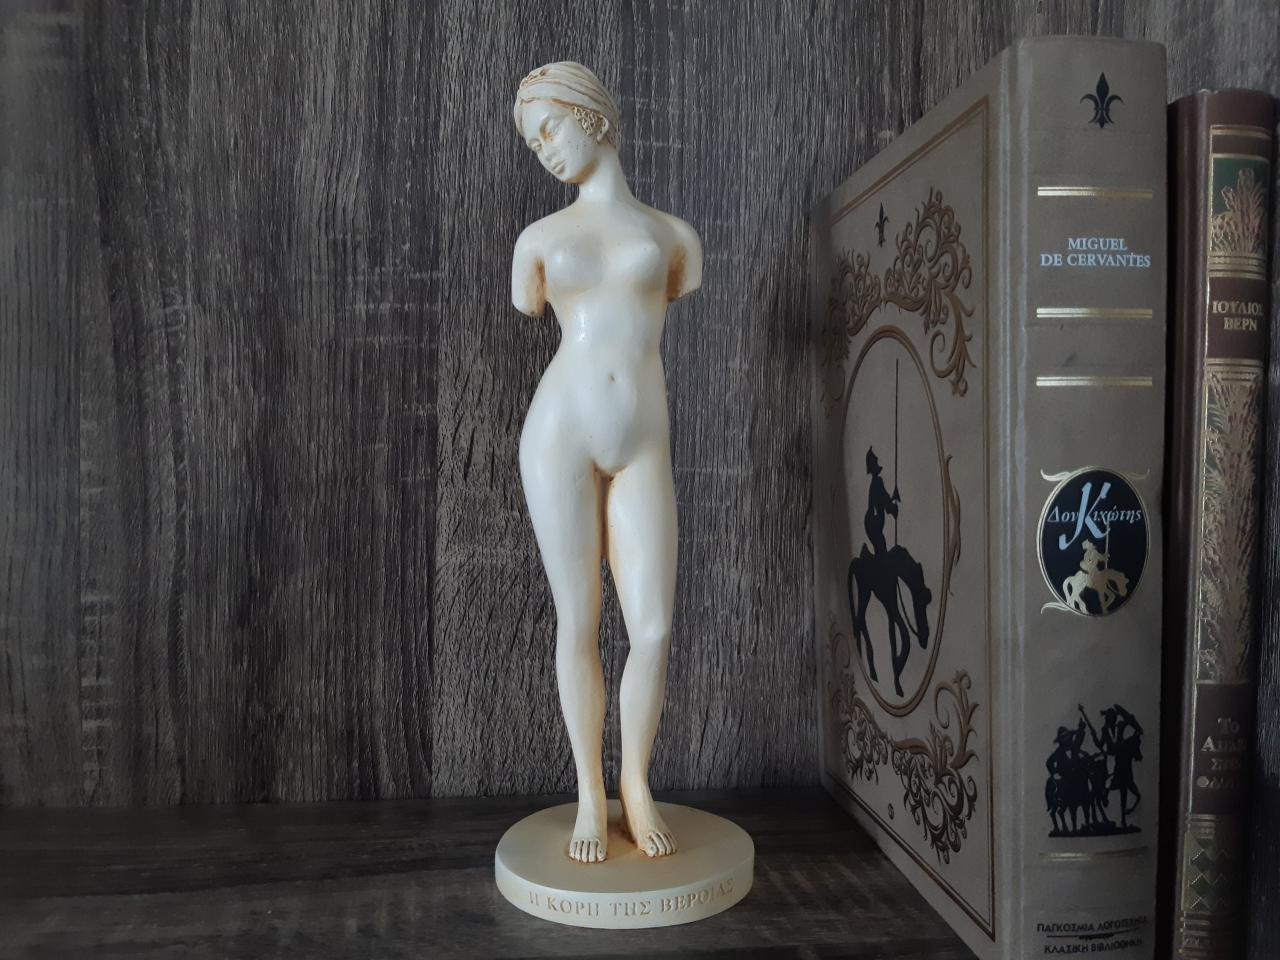 The Kore Of Beroia Statue Nude Female Sculpture Made Of Alabaster